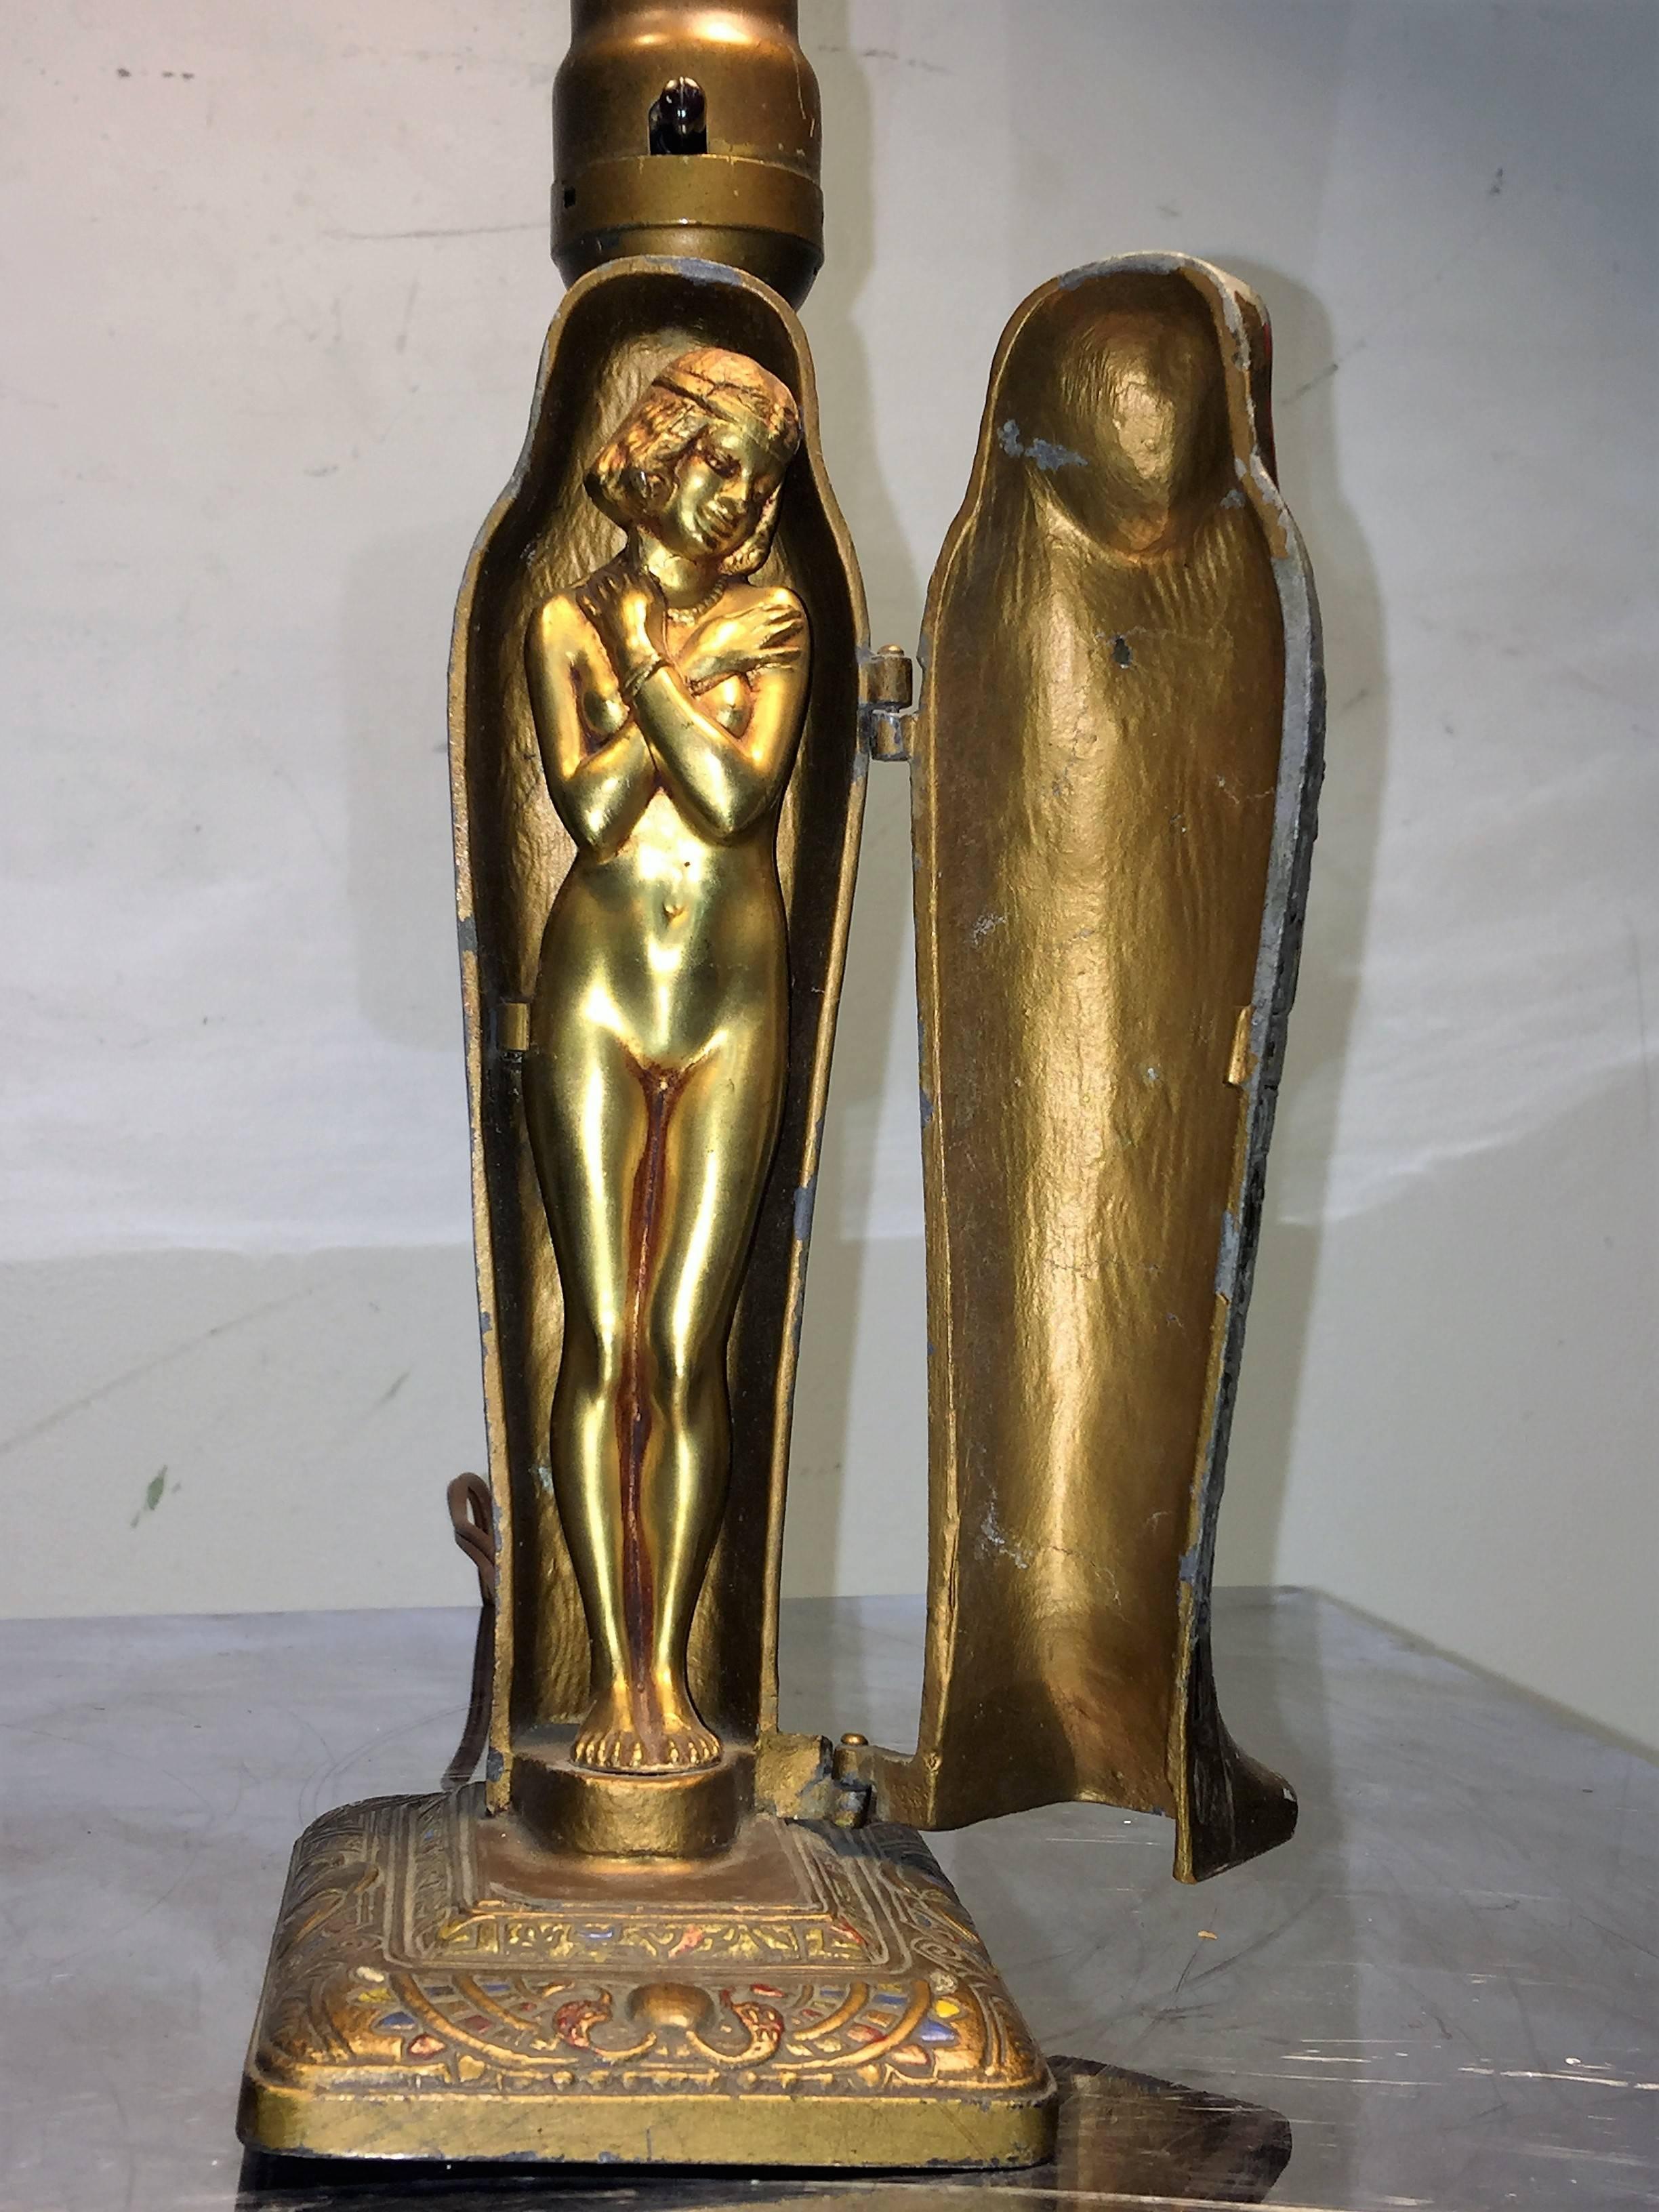 Great cold enamel metal colorfully decorated sarcophagus that opens on hinges to reveal a gilded nude female wearing an Egyptian headdress. You can use this 1923 naughty nude lamp as an accent lamp. Created by Louis V Aronson in 1923, who is the